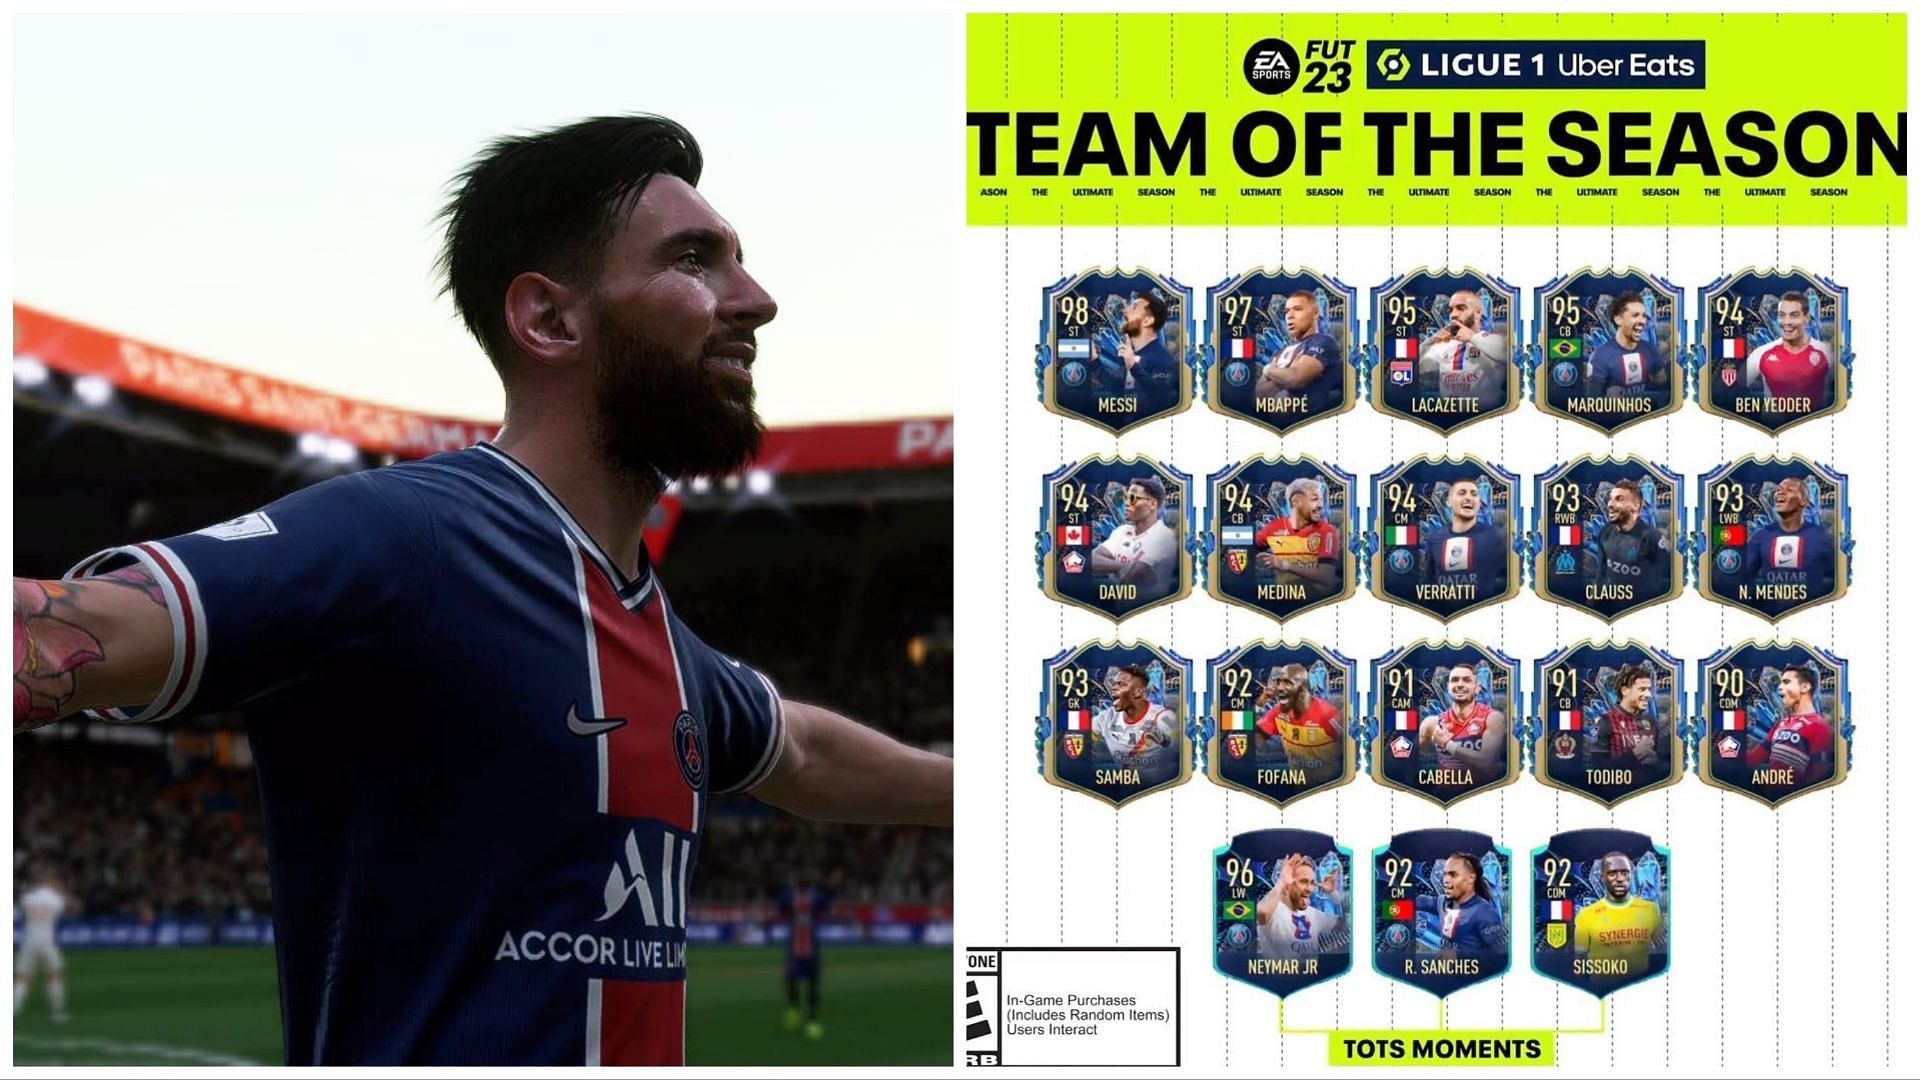 Ligue 1 TOTS is live in FIFA 23 (Images via EA Sports)